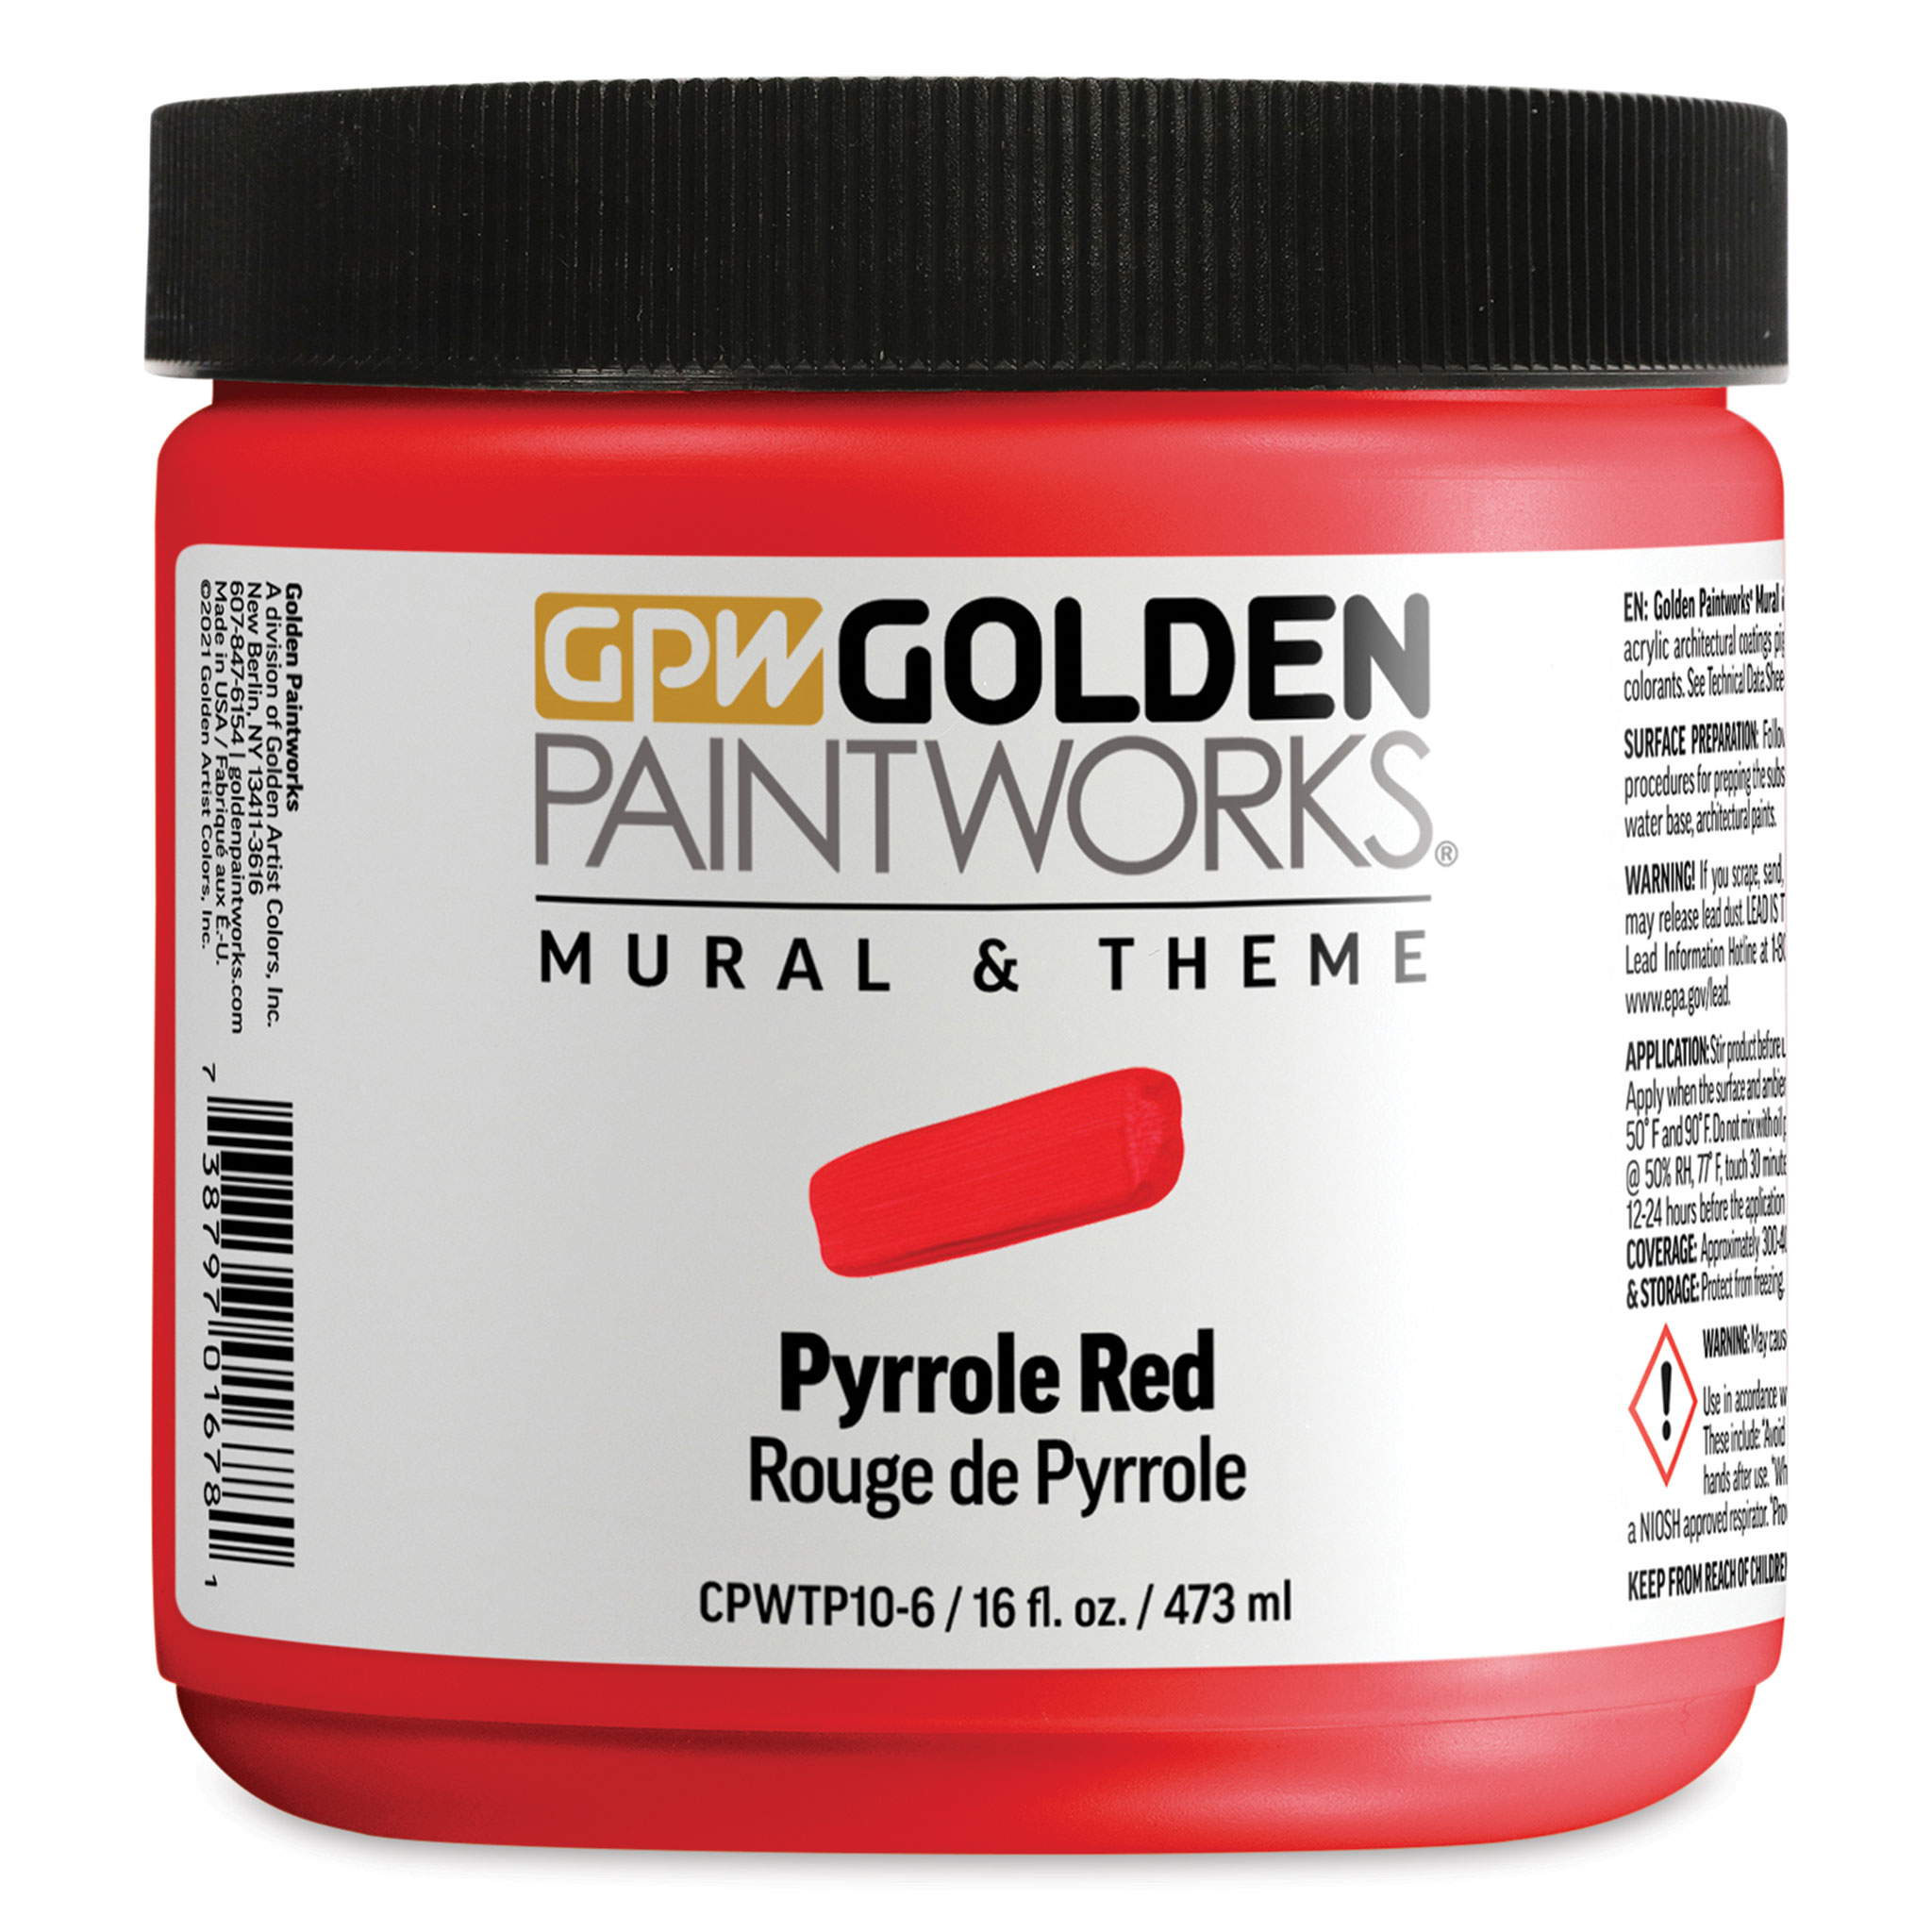 Golden Paintworks Mural and Theme Acrylic Paint - Pyrrole Red, 16 oz, Jar